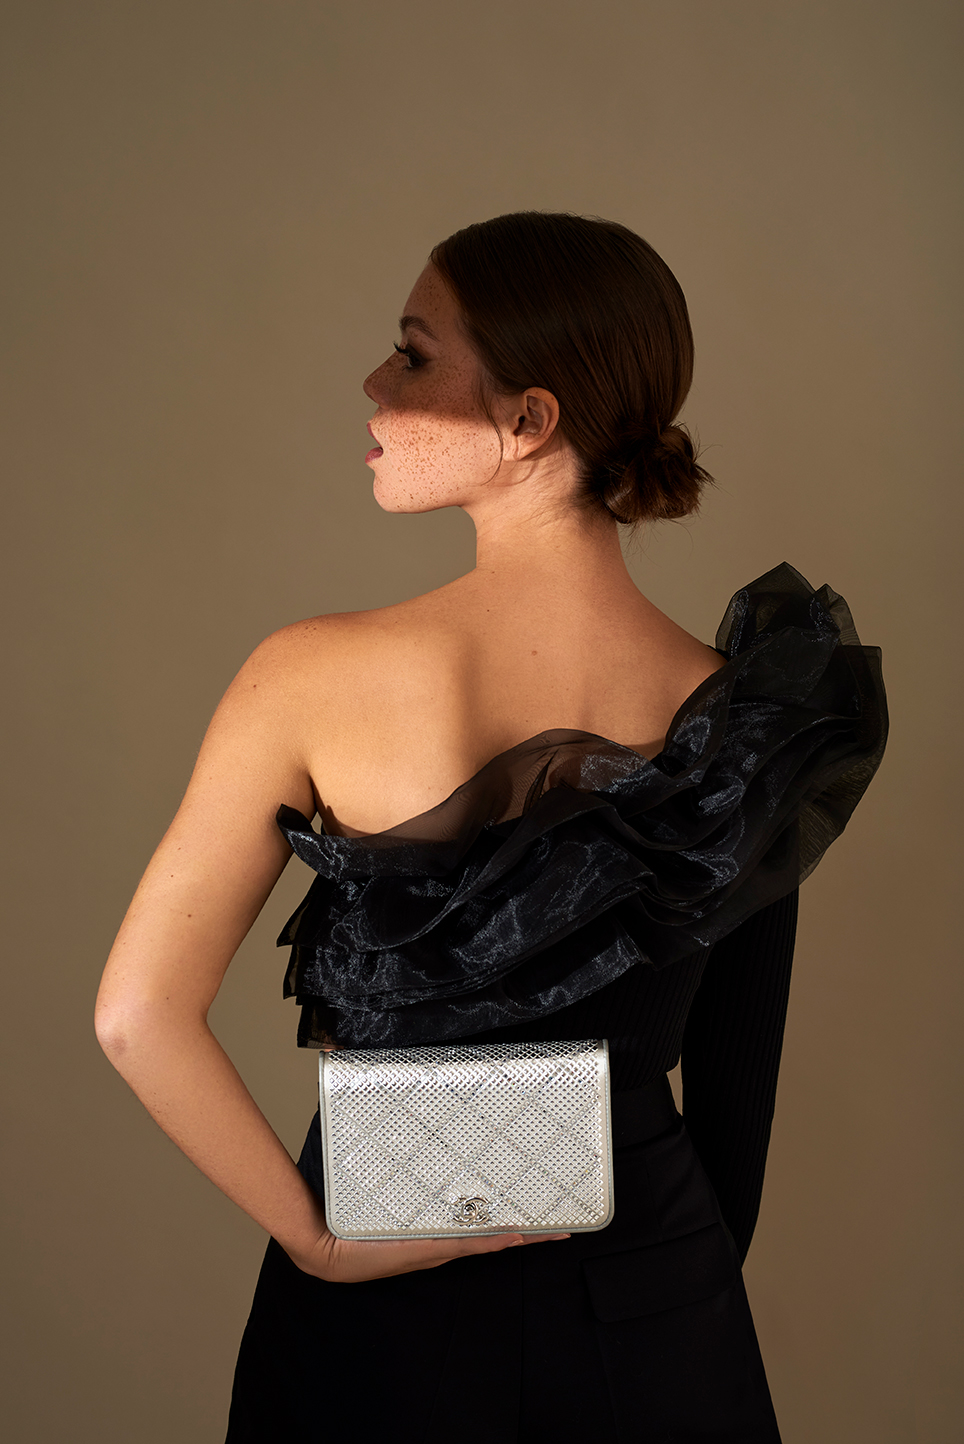 Model with focused light on her skin, lighting half of her face. She is holding a Chanelbag.